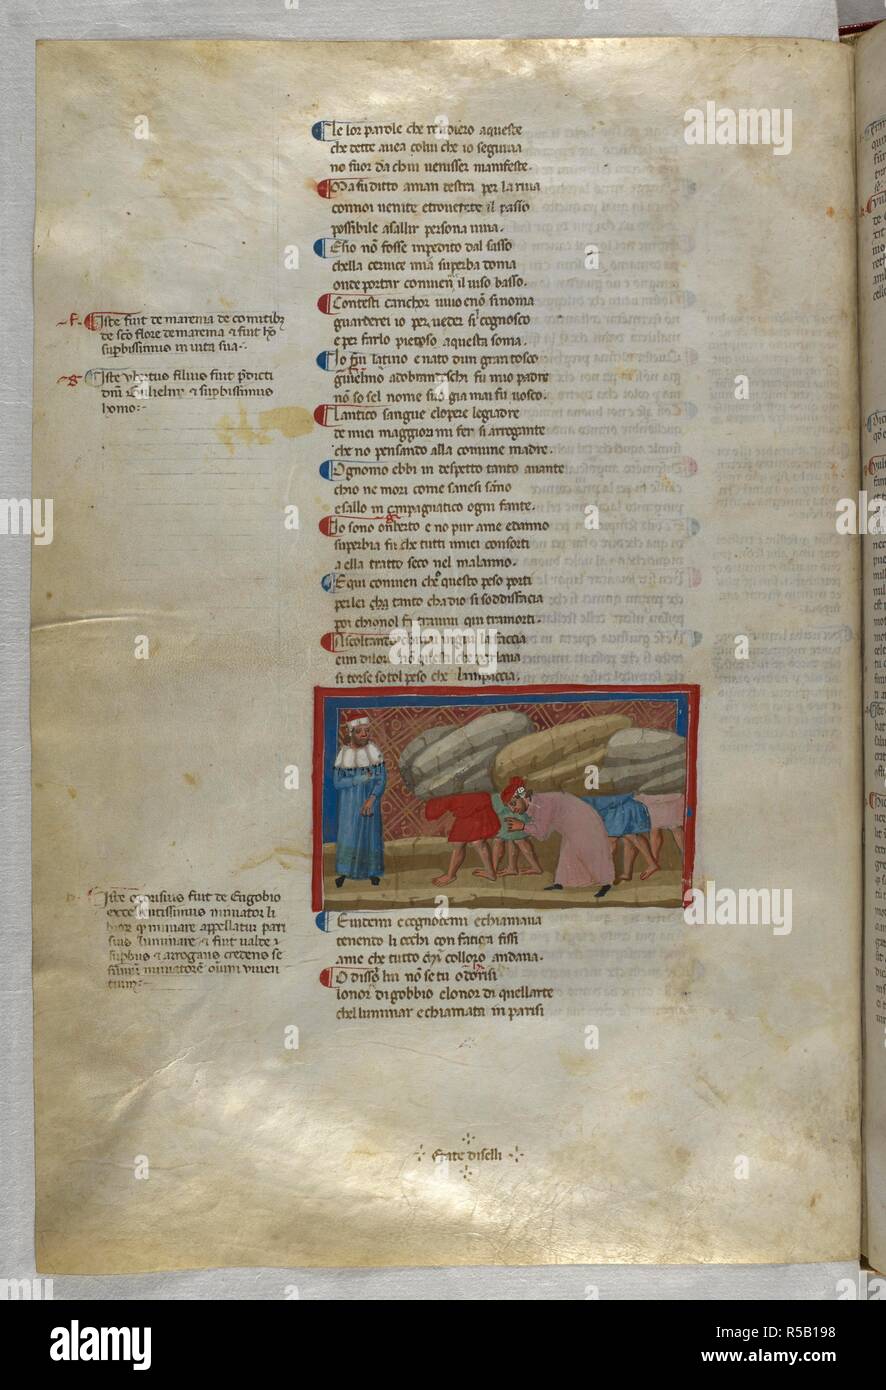 Purgatorio: Dante bending over to speak to one of the proud souls, perhaps Oderisi of Gubbio, the illuminator. Dante Alighieri, Divina Commedia ( The Divine Comedy ), with a commentary in Latin. 1st half of the 14th century. Source: Egerton 943, f.82v. Language: Italian, Latin. Stock Photo